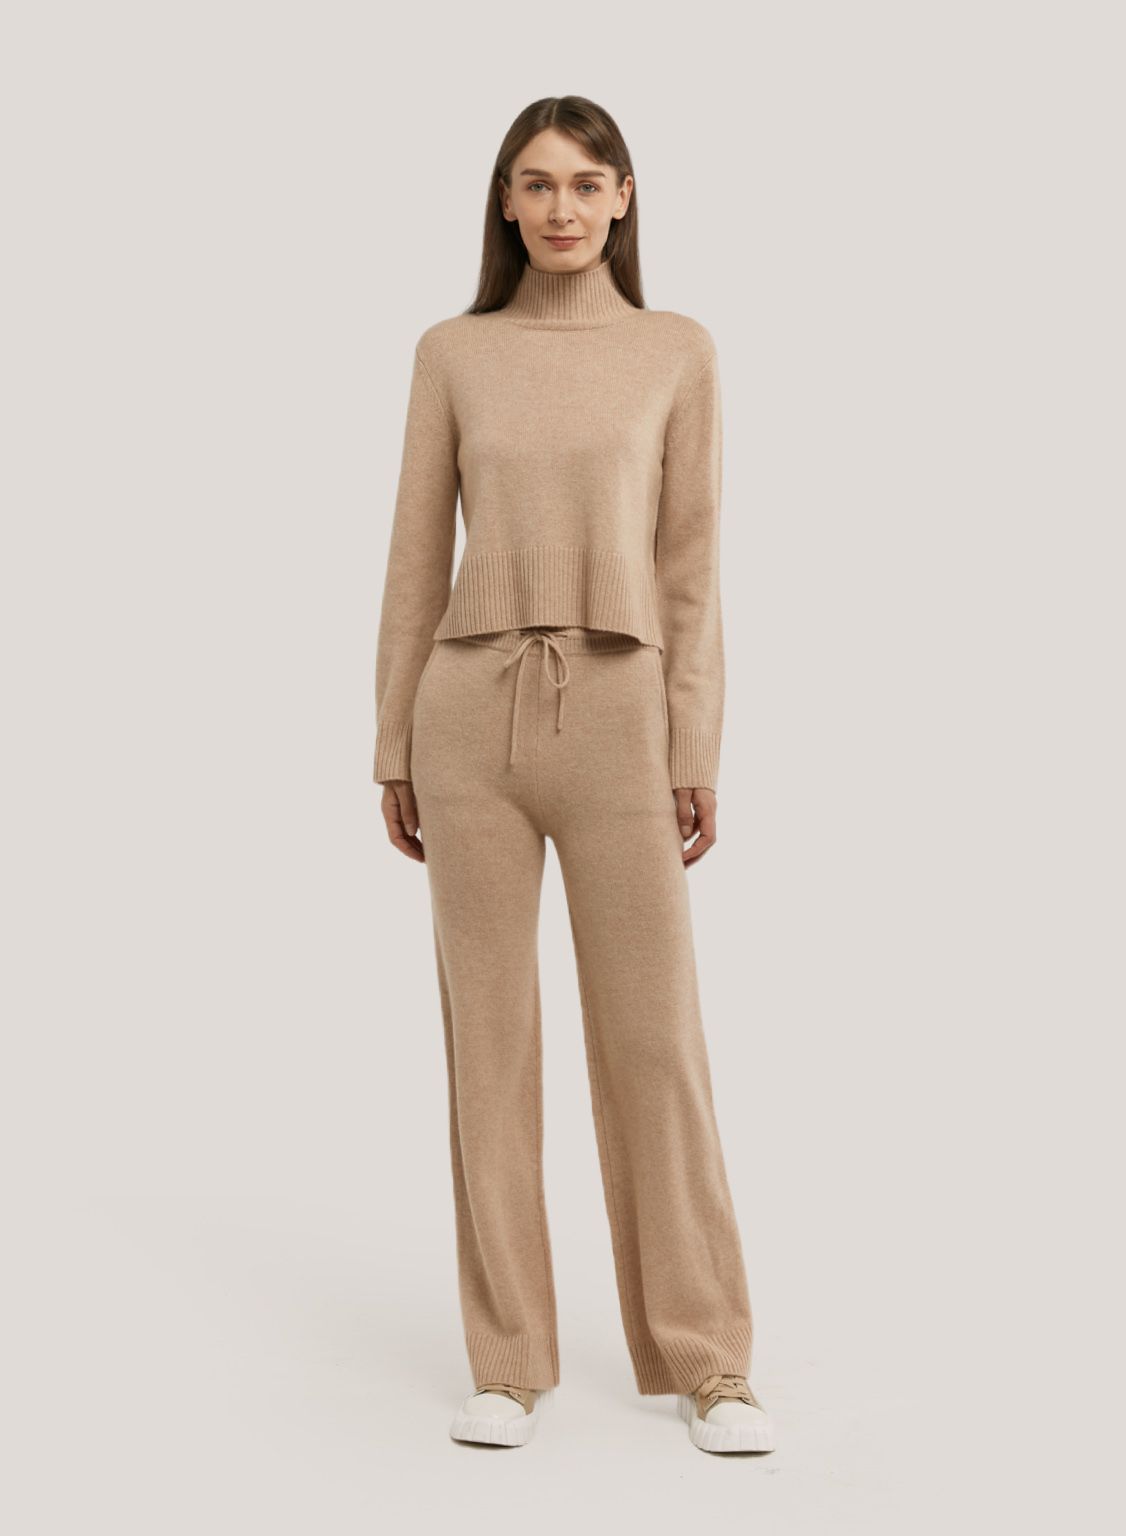 Sweater And Pants 100% Cashmere Set | Gentle Herd